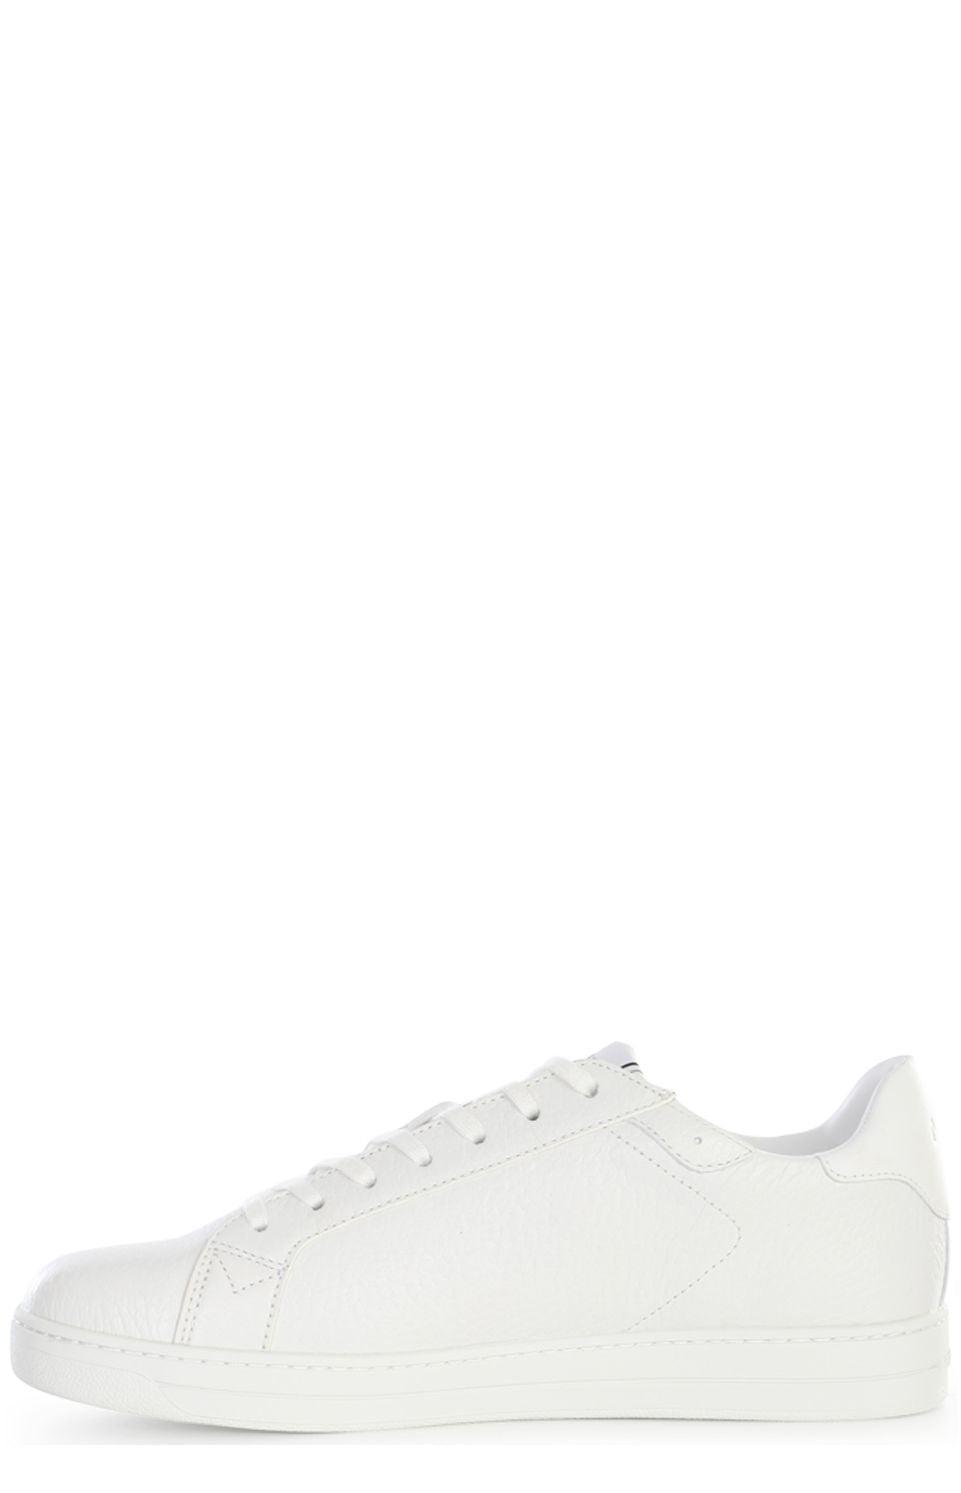 Michael Kors Leather Keating Lace-up Sneakers in White for Men | Lyst